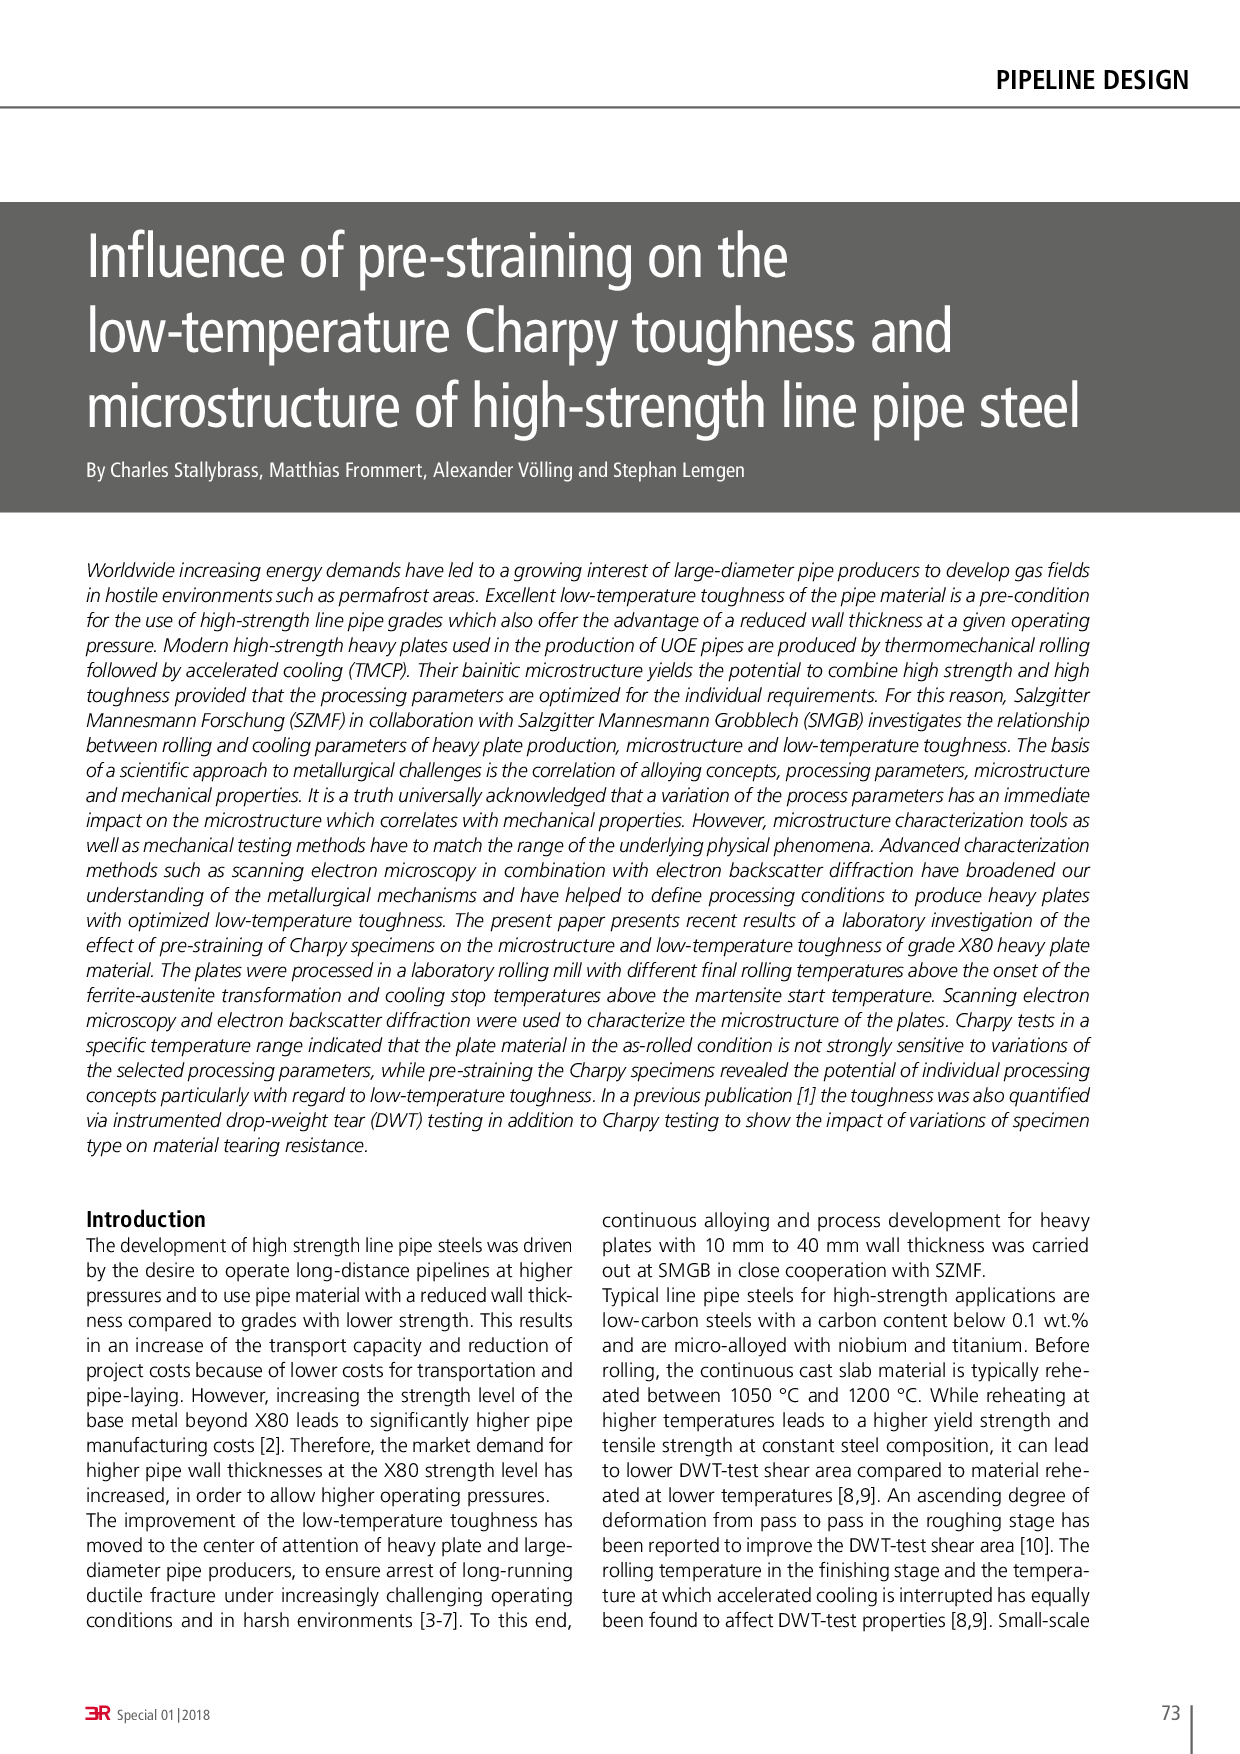 Influence of pre-straining on the low-temperature Charpy toughness and microstructure of high-strength line pipe steel